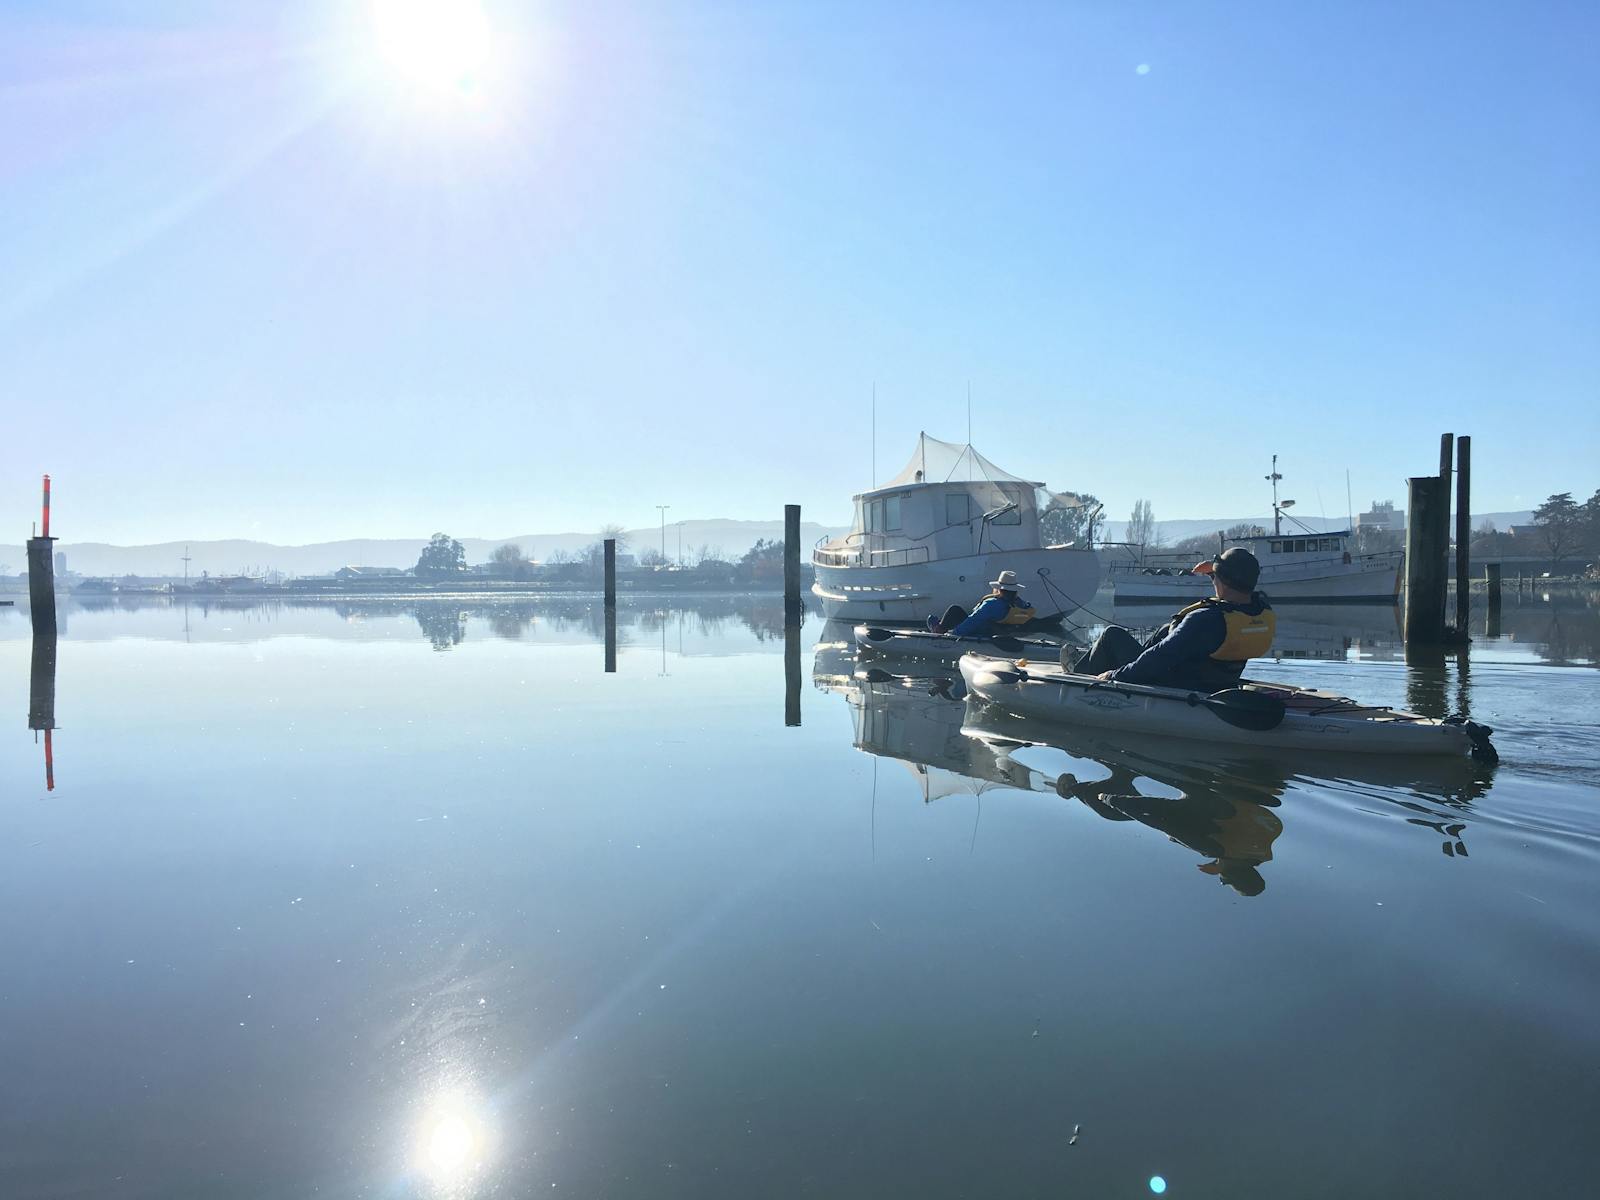 2 people in kayaks paddle on calm reflective water on the Tamar River